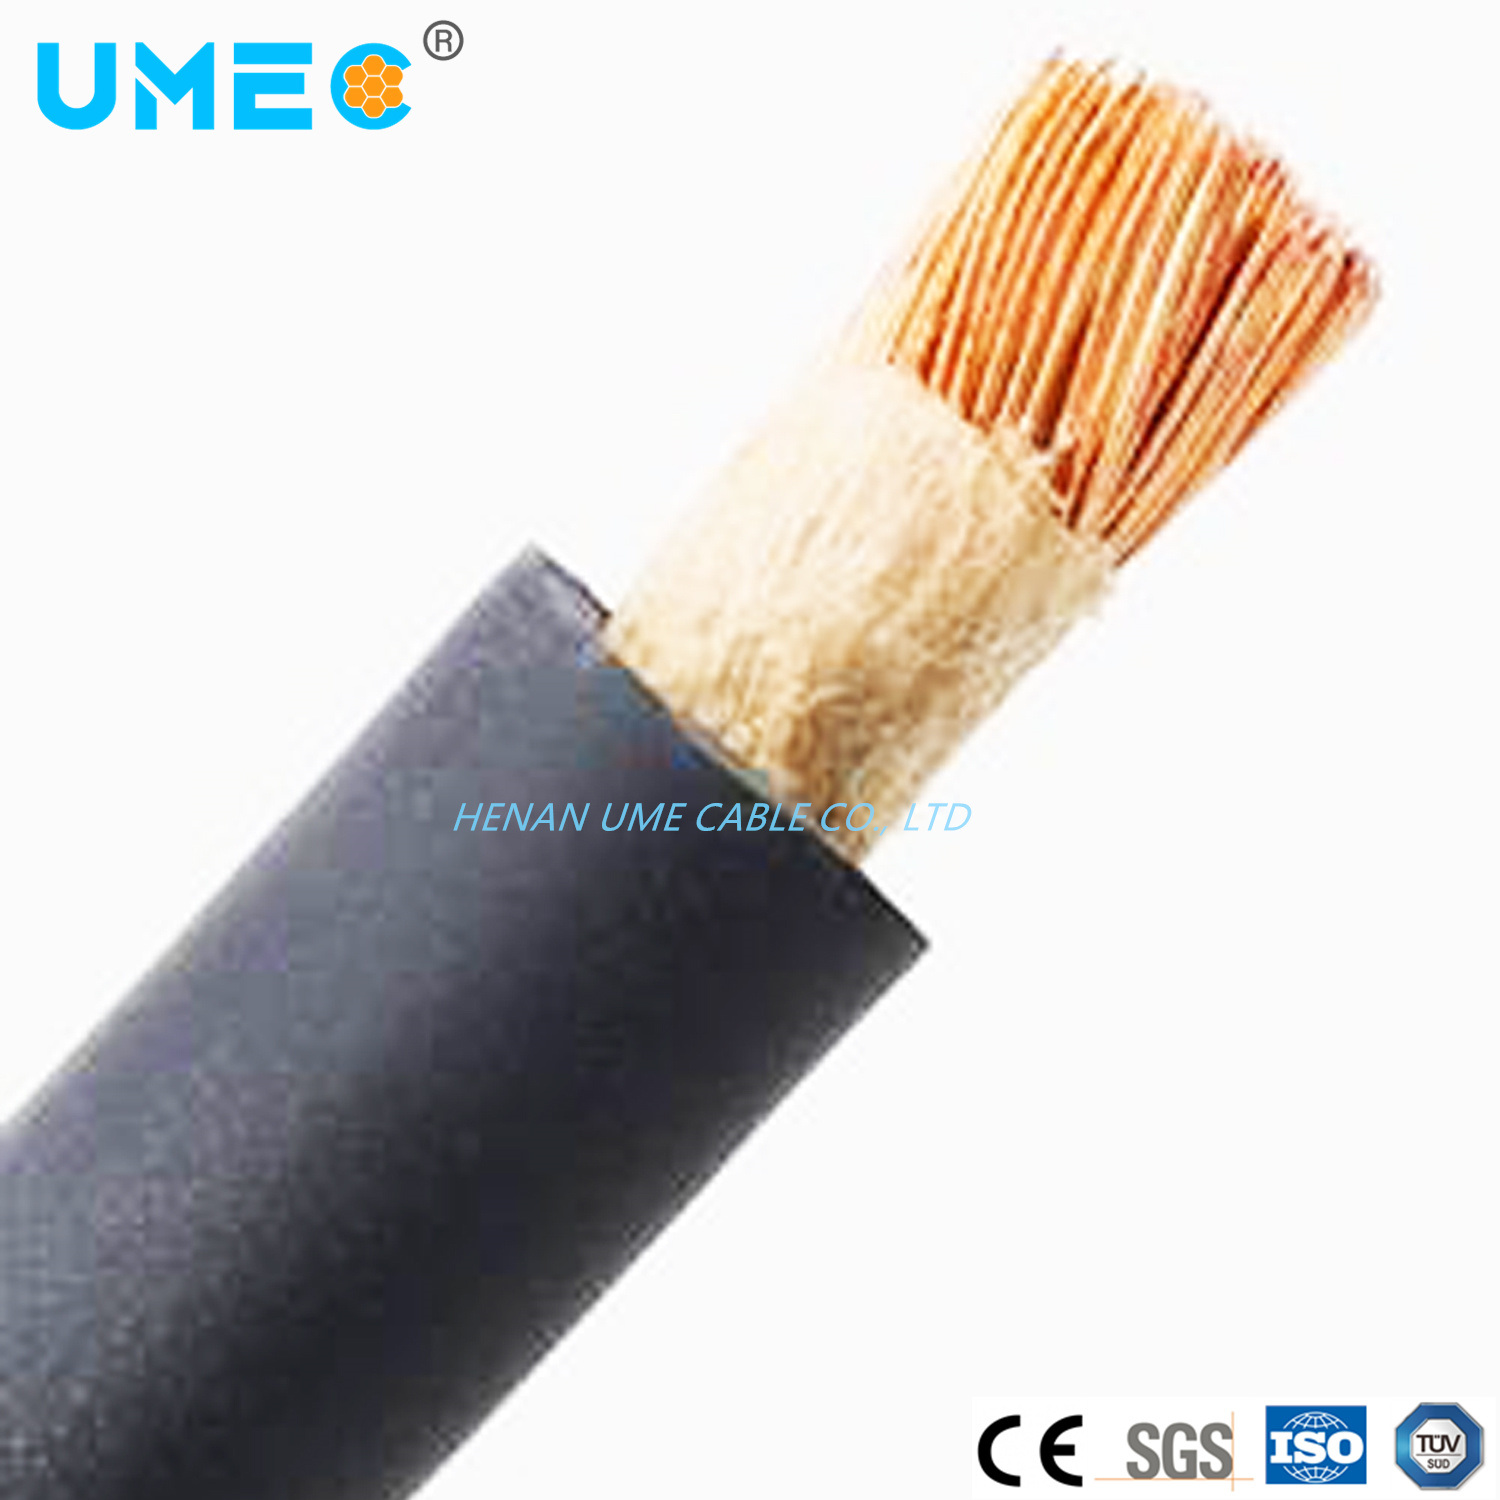 Direct Wholesale Flexible Aluminum Alloy or Copper Conductor Rubber Welding Cable for Industrial Use Ho1n2-D